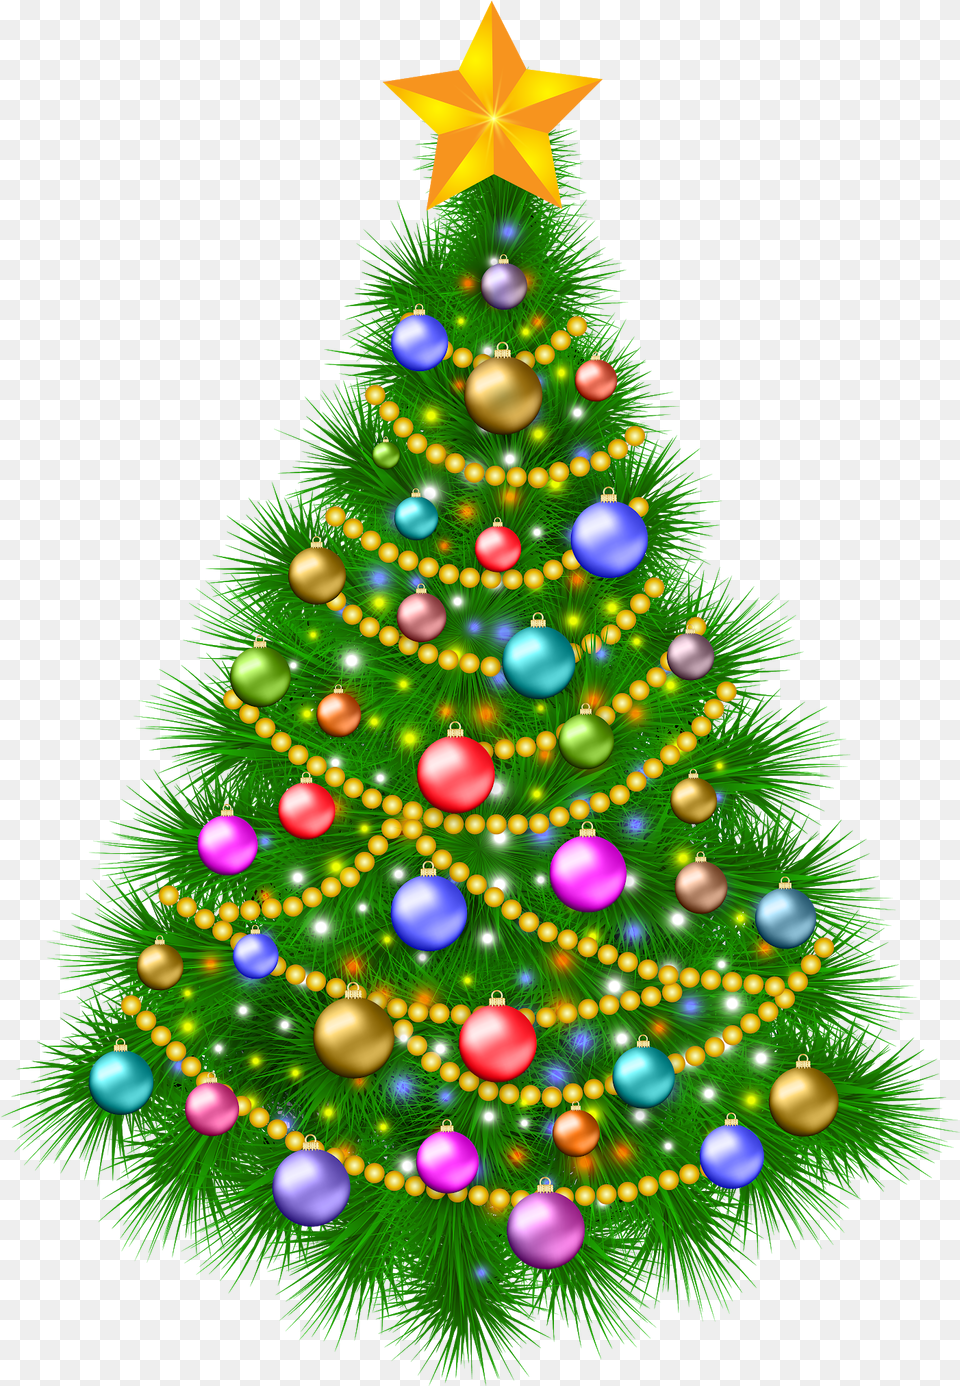 Pngsector Christmas Tree Background, Christmas Decorations, Festival, Christmas Tree, Plant Png